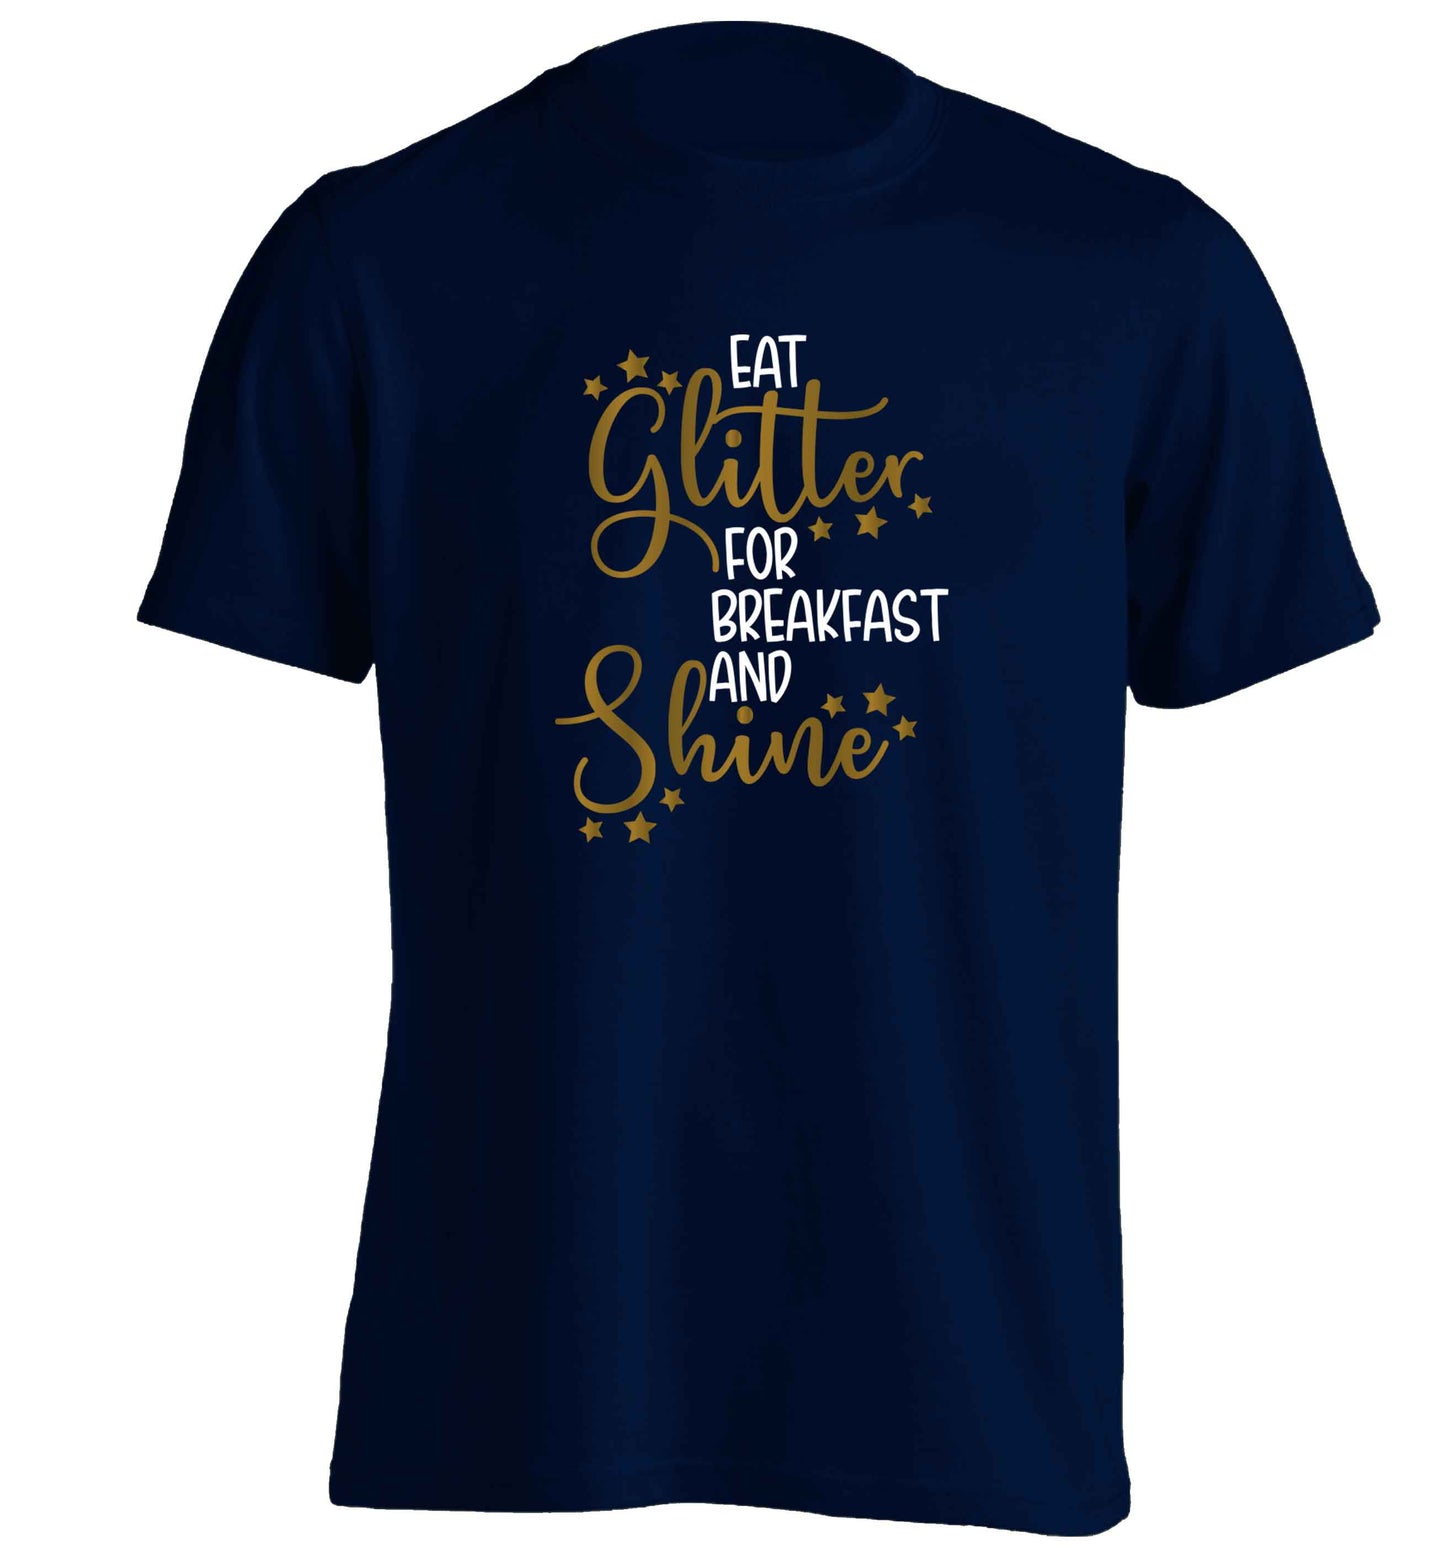 Eat glitter for breakfast and shine all day adults unisex navy Tshirt 2XL